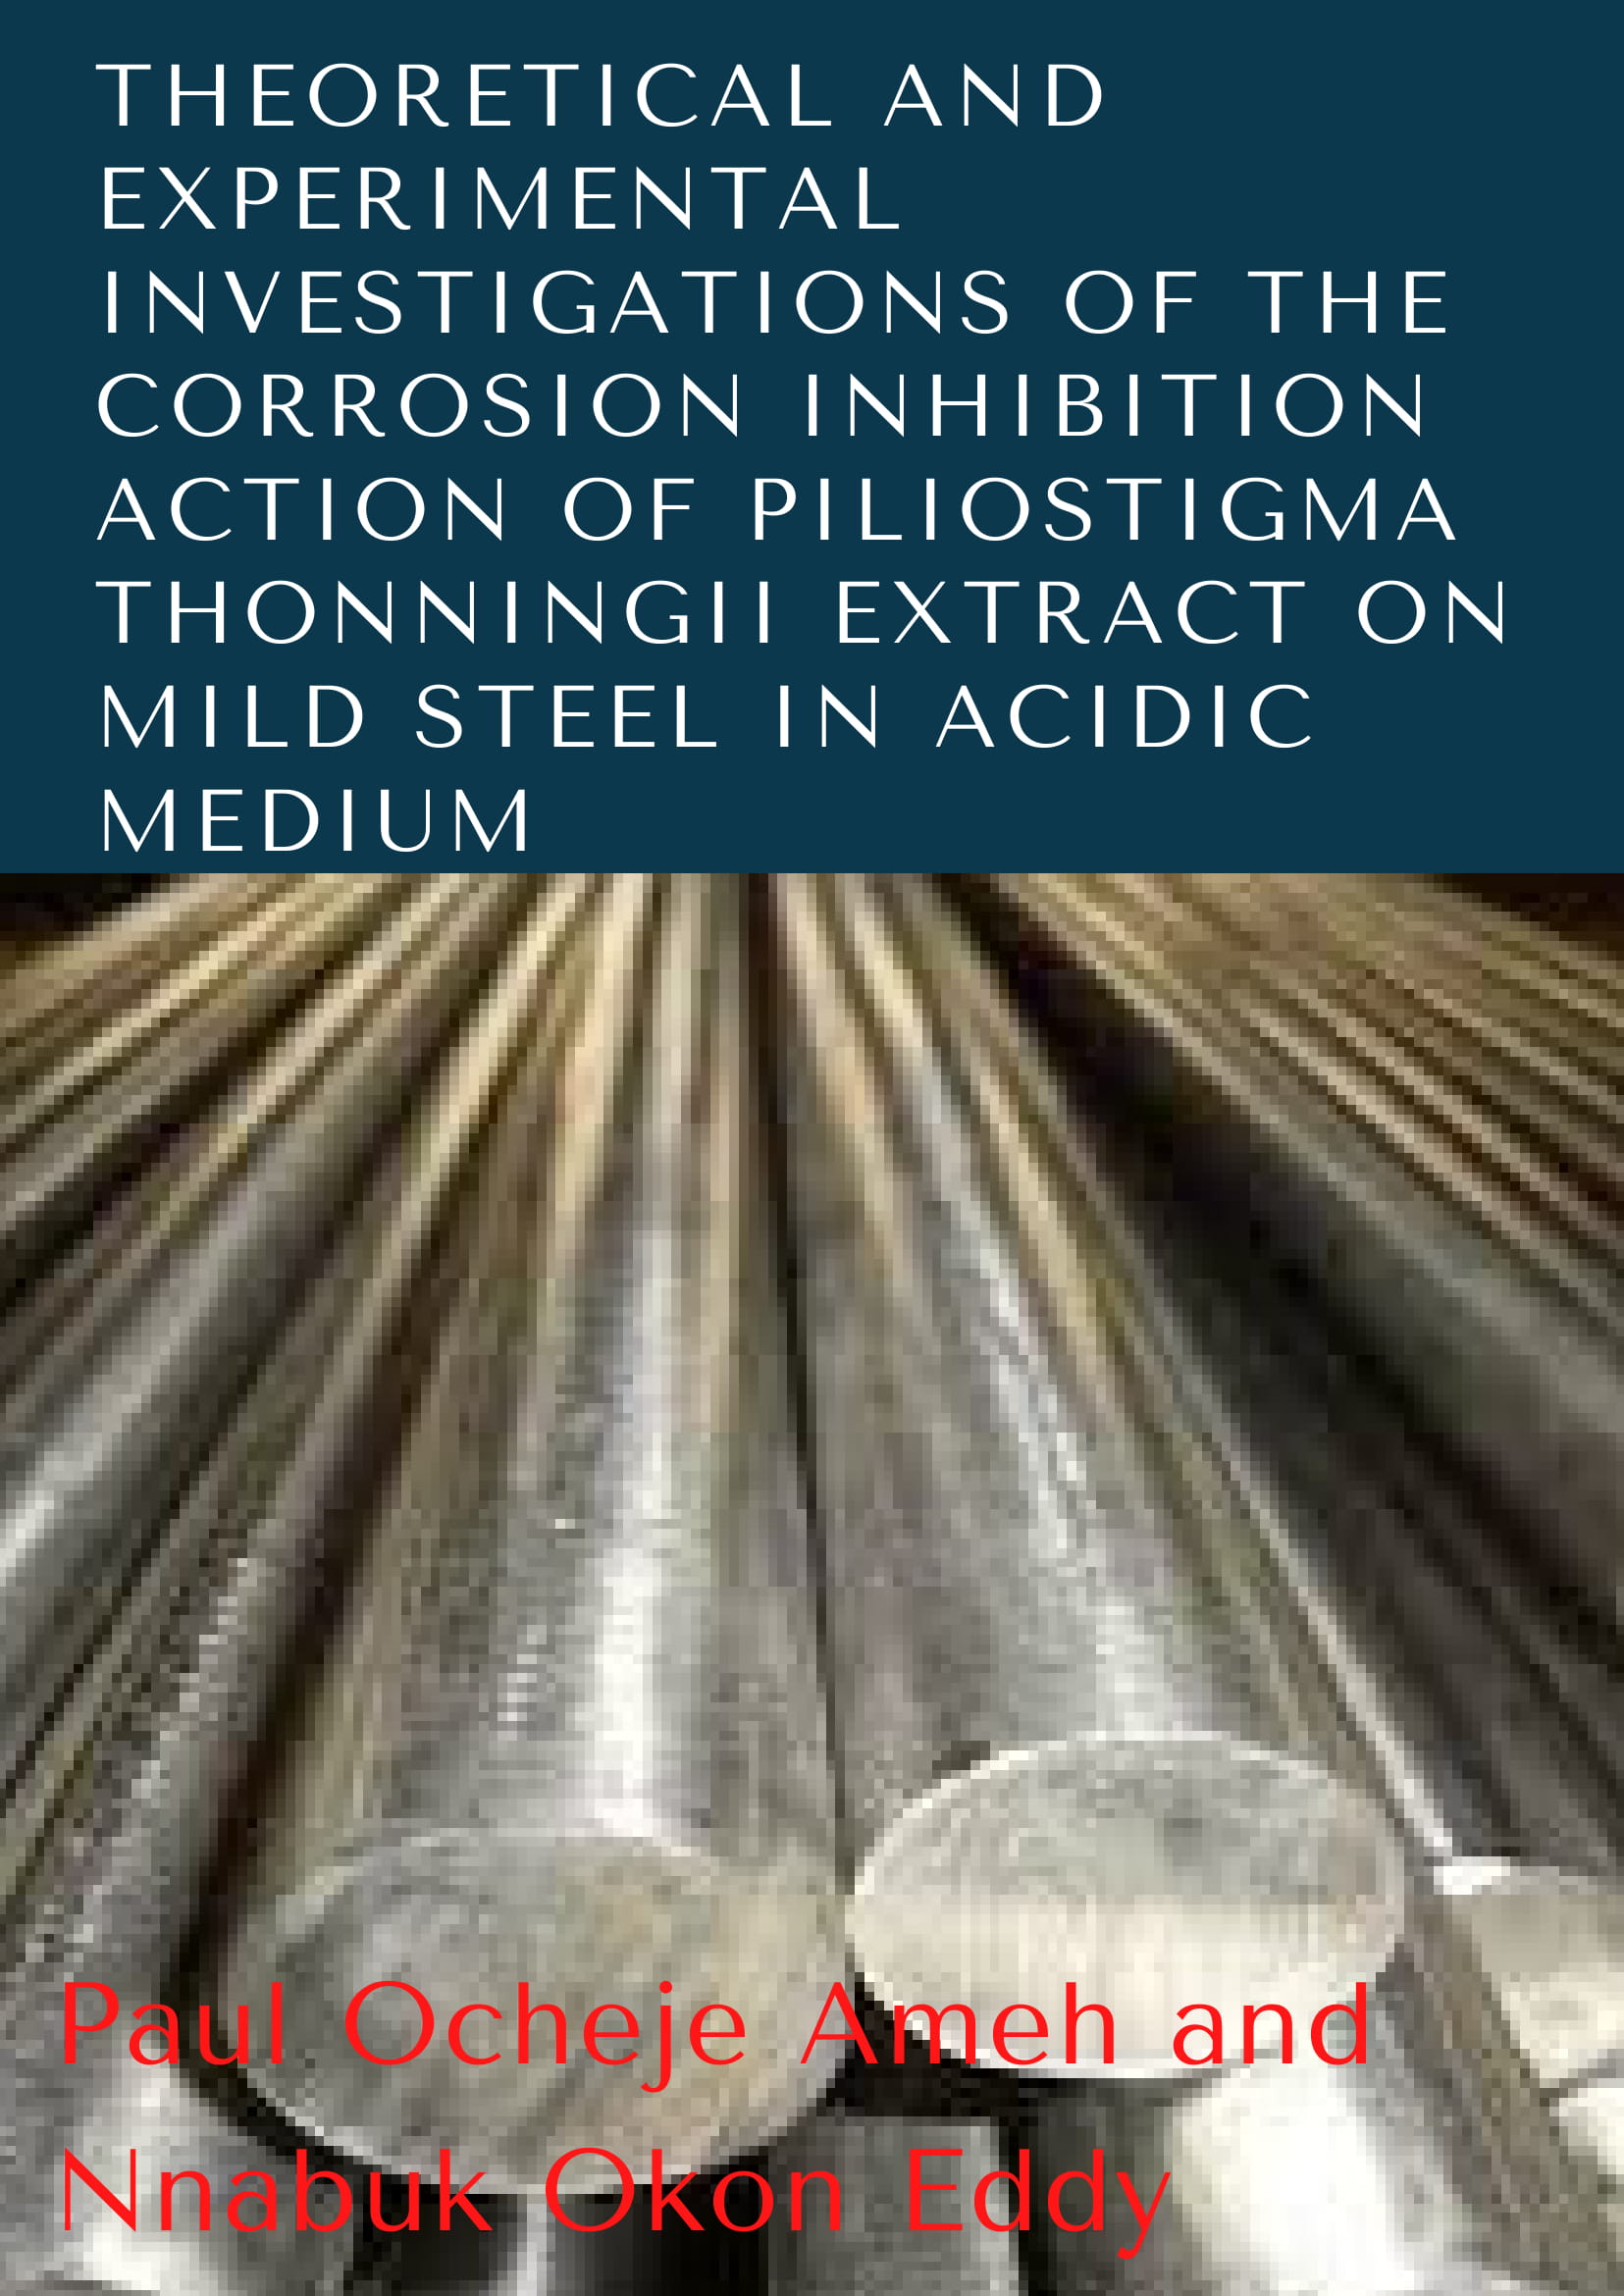 Theoretical and Experimental Investigations of the Corrosion Inhibition Action of Piliostigma Thonningii Extract on Mild Steel in Acidic Medium image